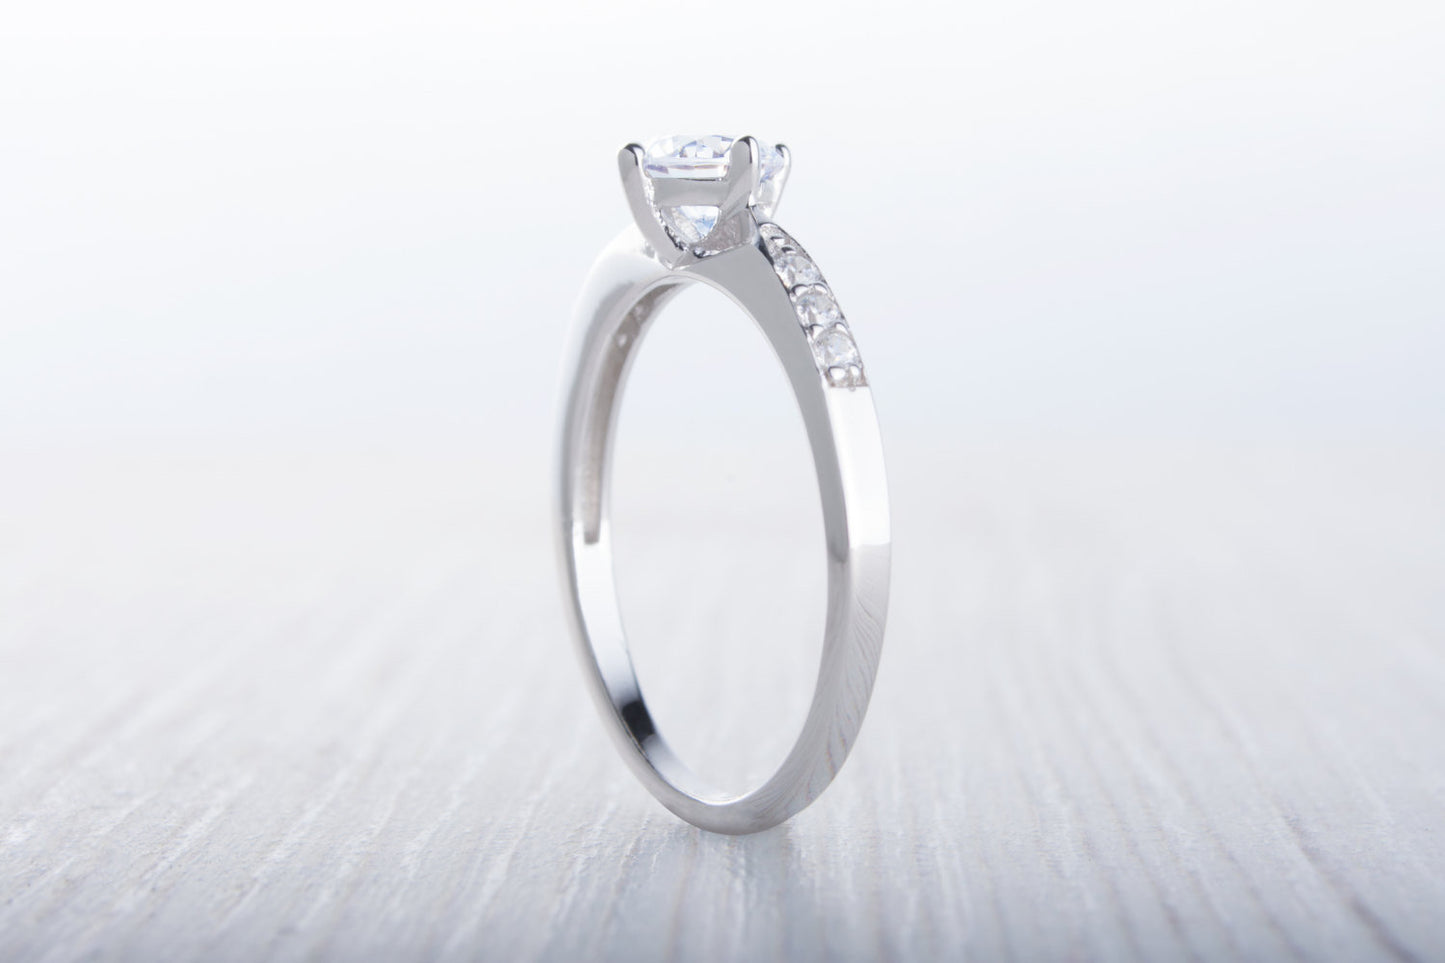 Genuine White Moissanite solitaire ring - Available in sterling silver or white gold - engagement ring - wedding ring